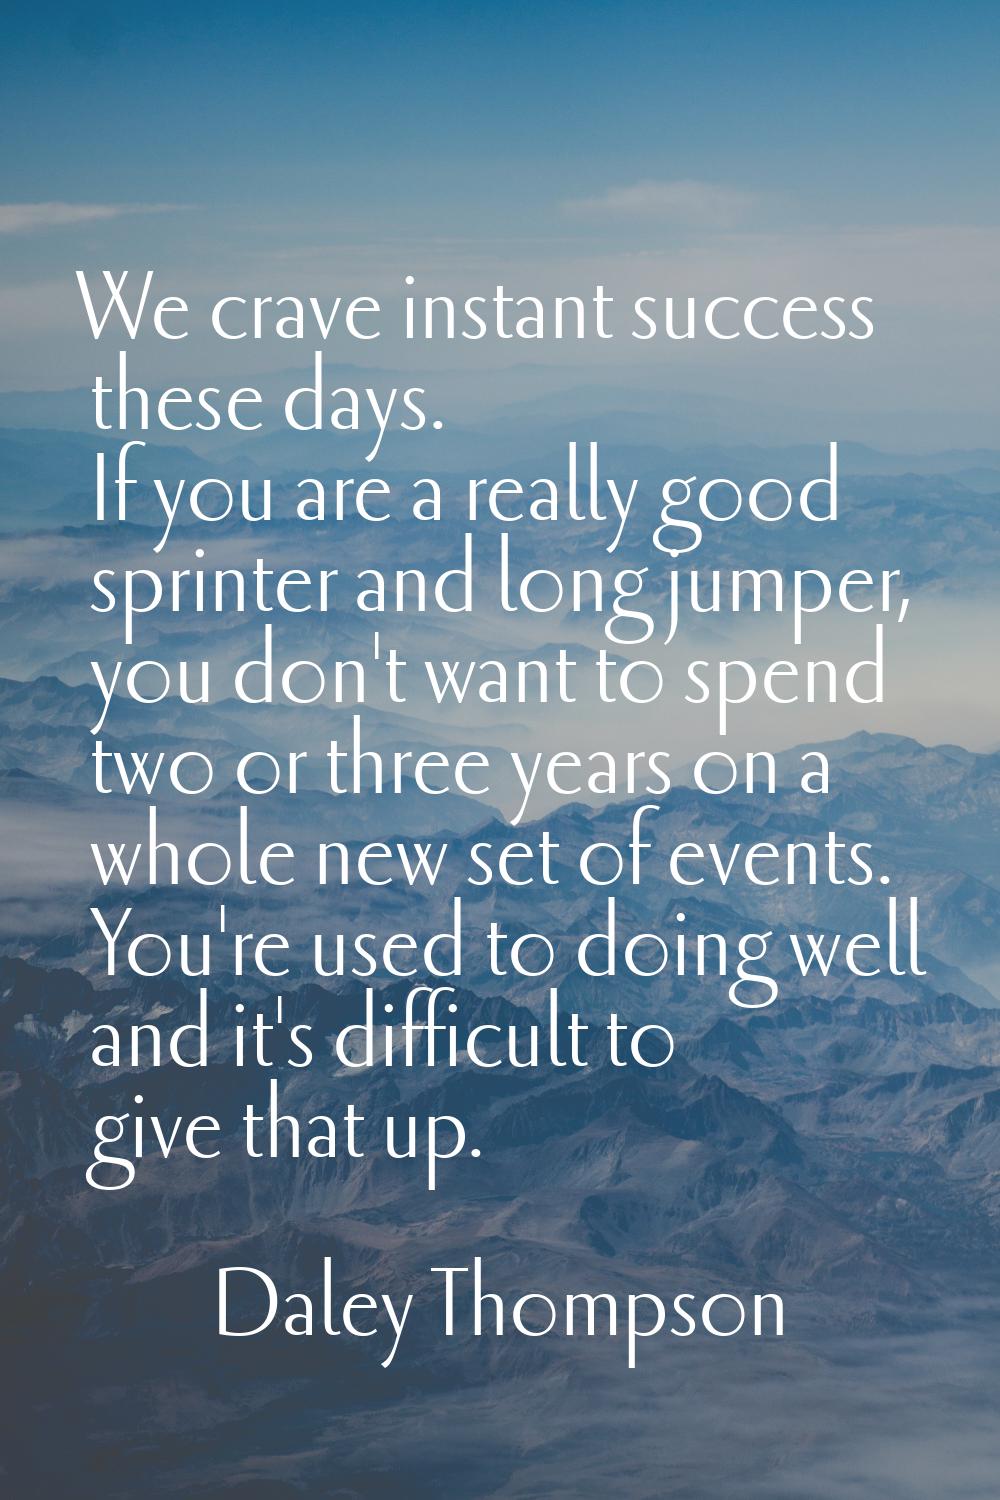 We crave instant success these days. If you are a really good sprinter and long jumper, you don't w